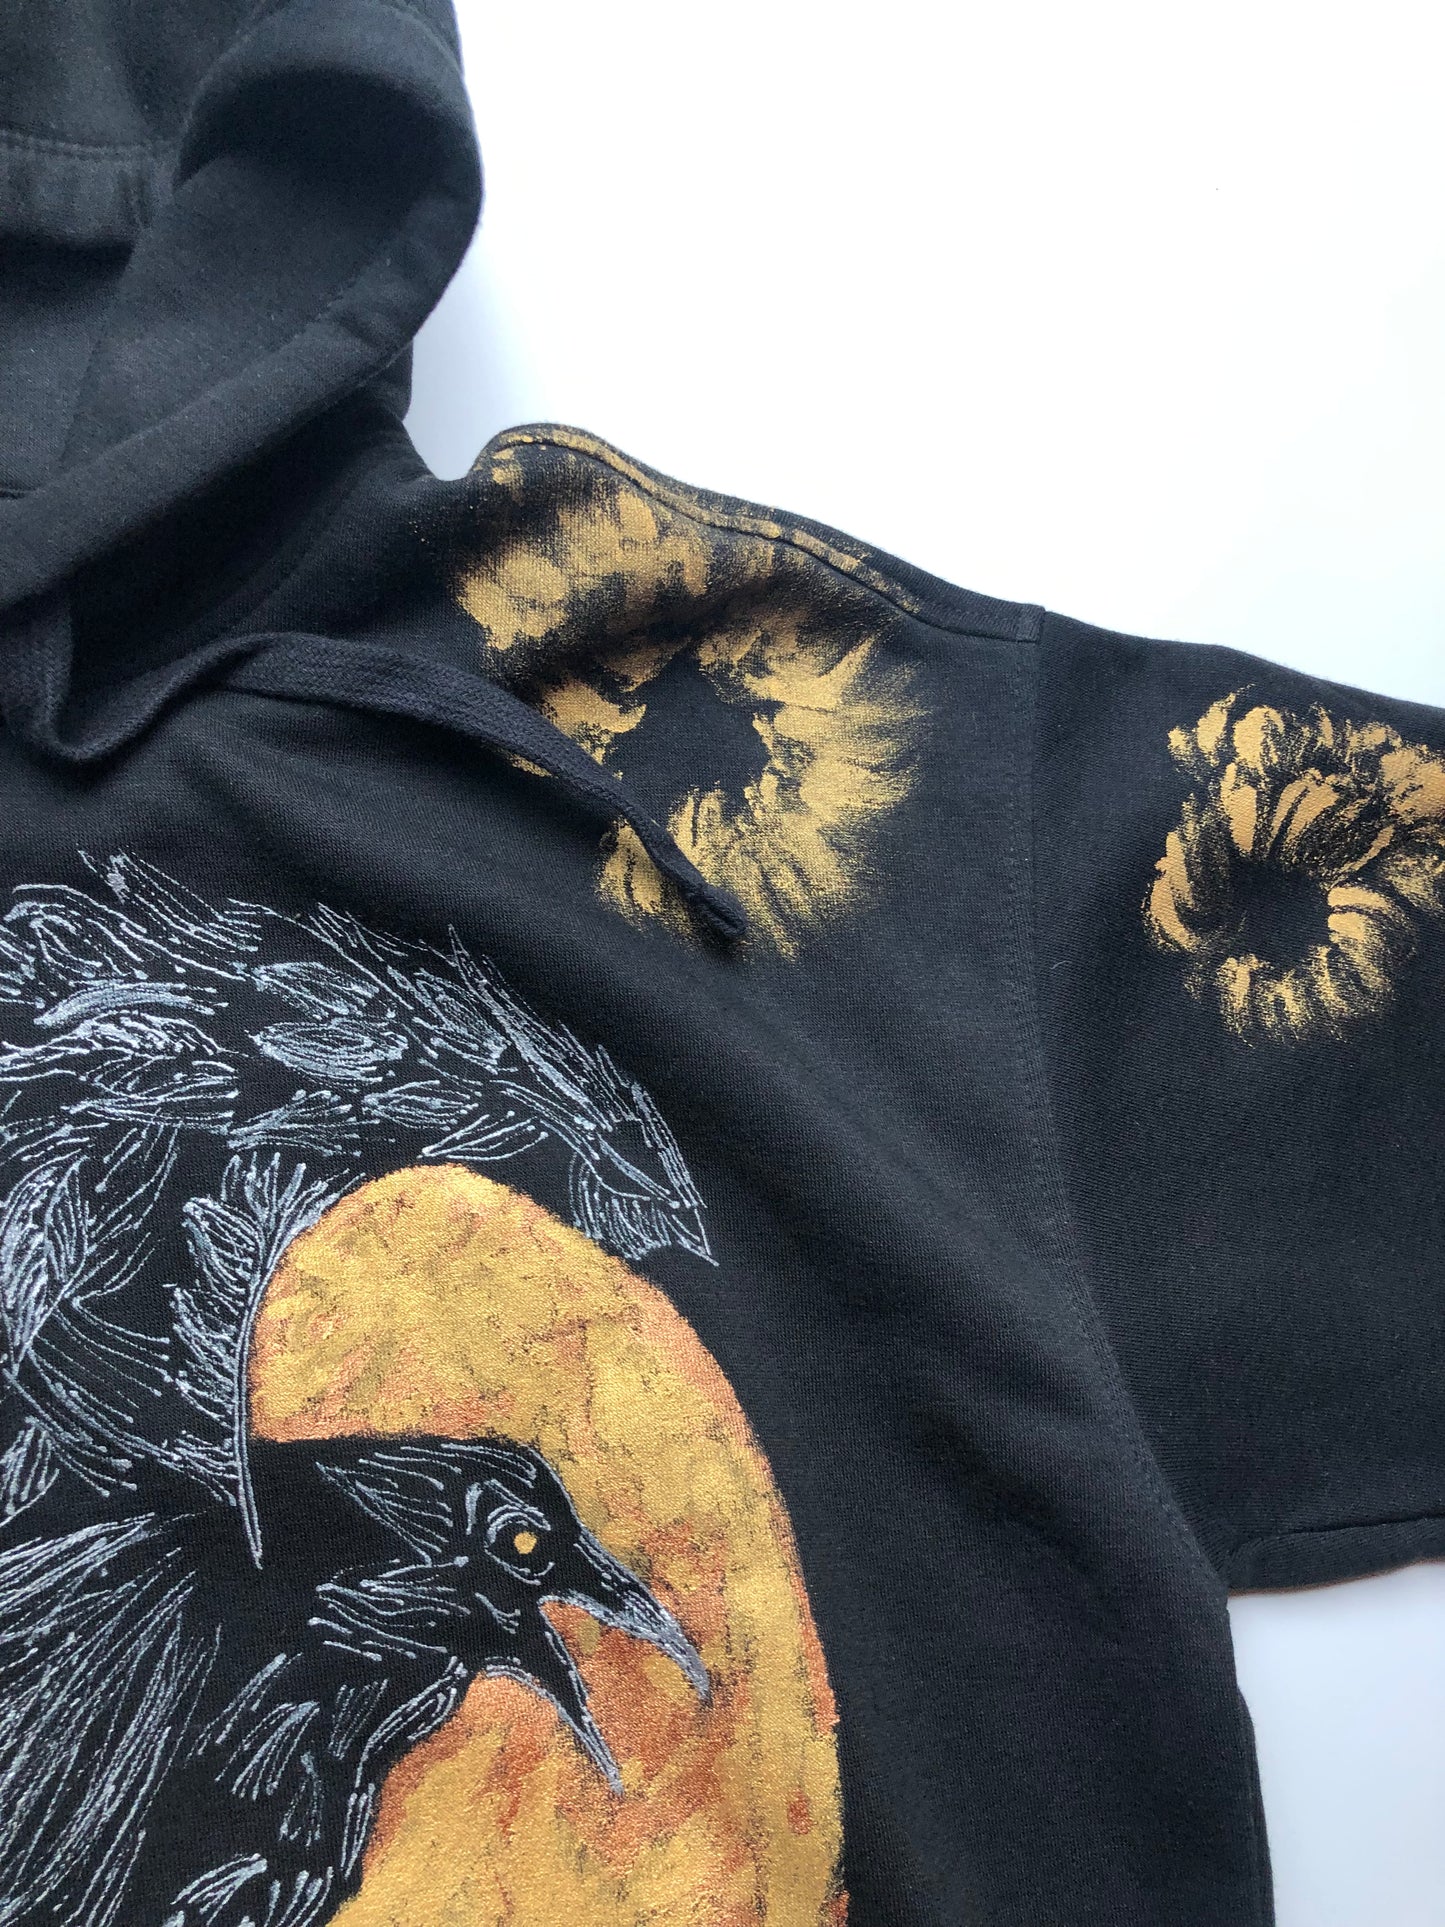 Women's hoodie black gold patterns on the sleeves details